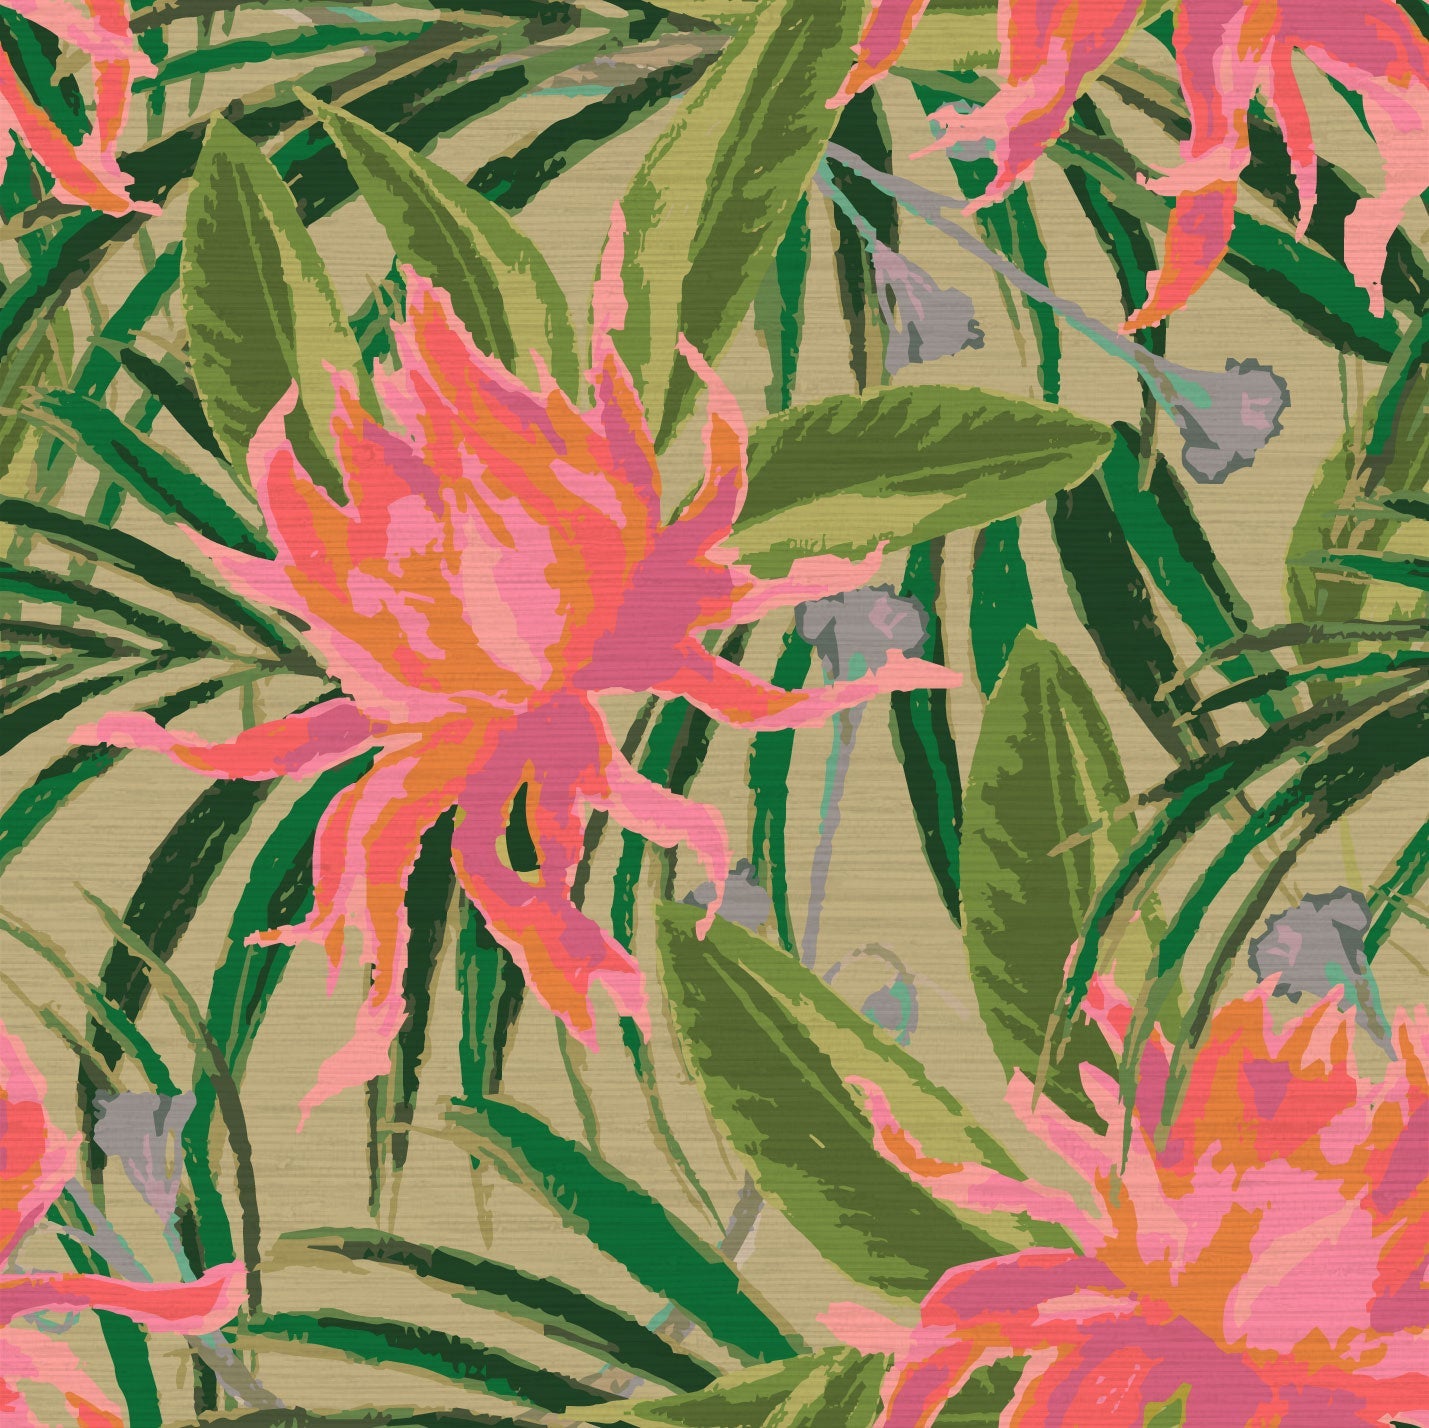 Load image into Gallery viewer, grasscloth wallpaper with olive green based featuring oversized painterly tropical flowers and palm leafs in striking shades of pink, orange and lavender and leafs in shades of deep green Natural Textured Eco-Friendly Non-toxic High-quality Sustainable Interior Design Bold Custom Tailor-made Retro chic Tropical Jungle Coastal preppy Garden Seaside Coastal Seashore Waterfront Vacation home styling Retreat Relaxed beach vibes Beach cottage Shoreline Oceanfront botanical palm leaf
